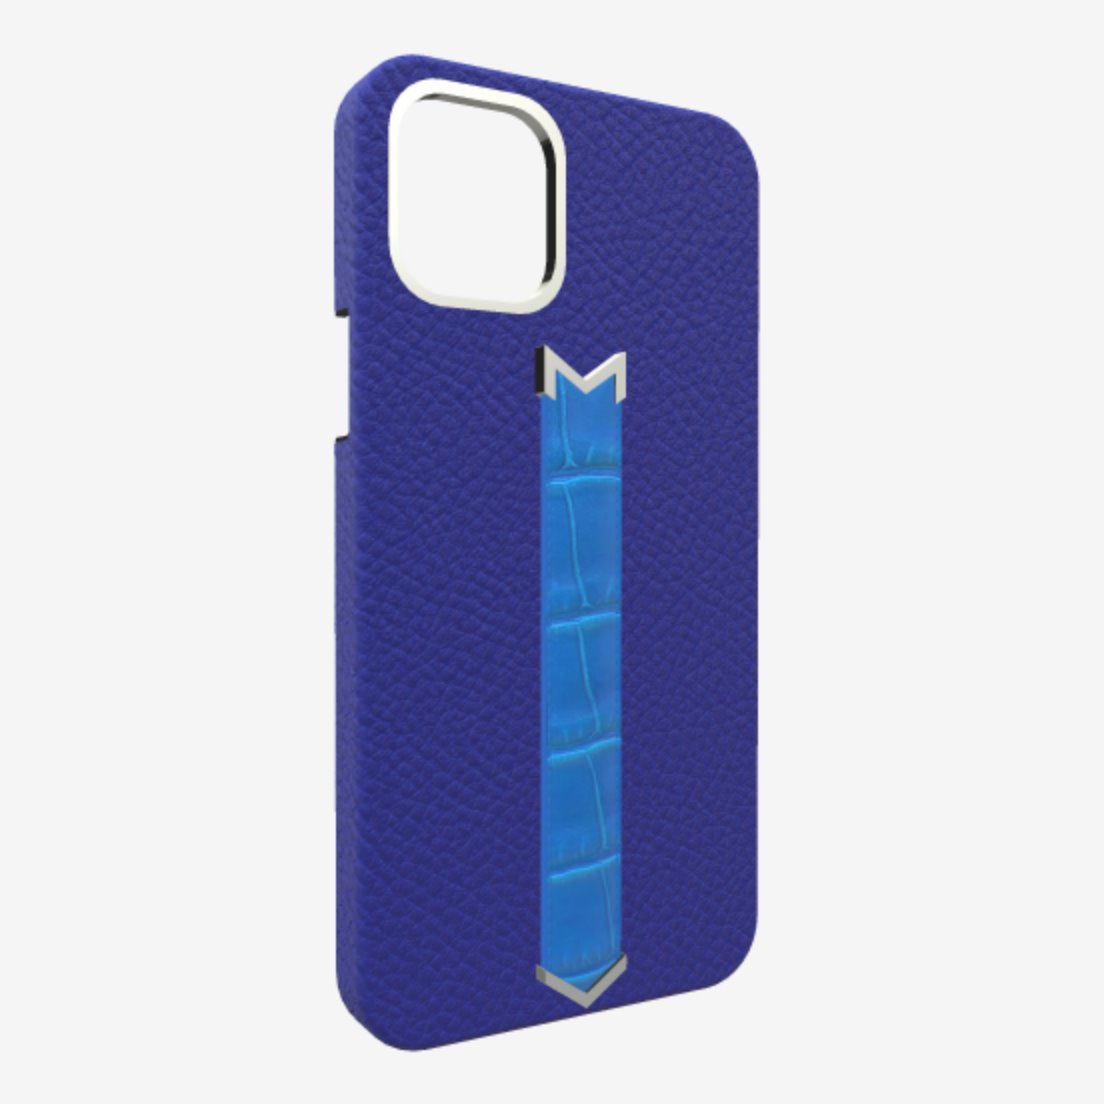 Silver Finger Strap Case for iPhone 13 Pro in Genuine Calfskin and Alligator Electric-Blue Royal-Blue 